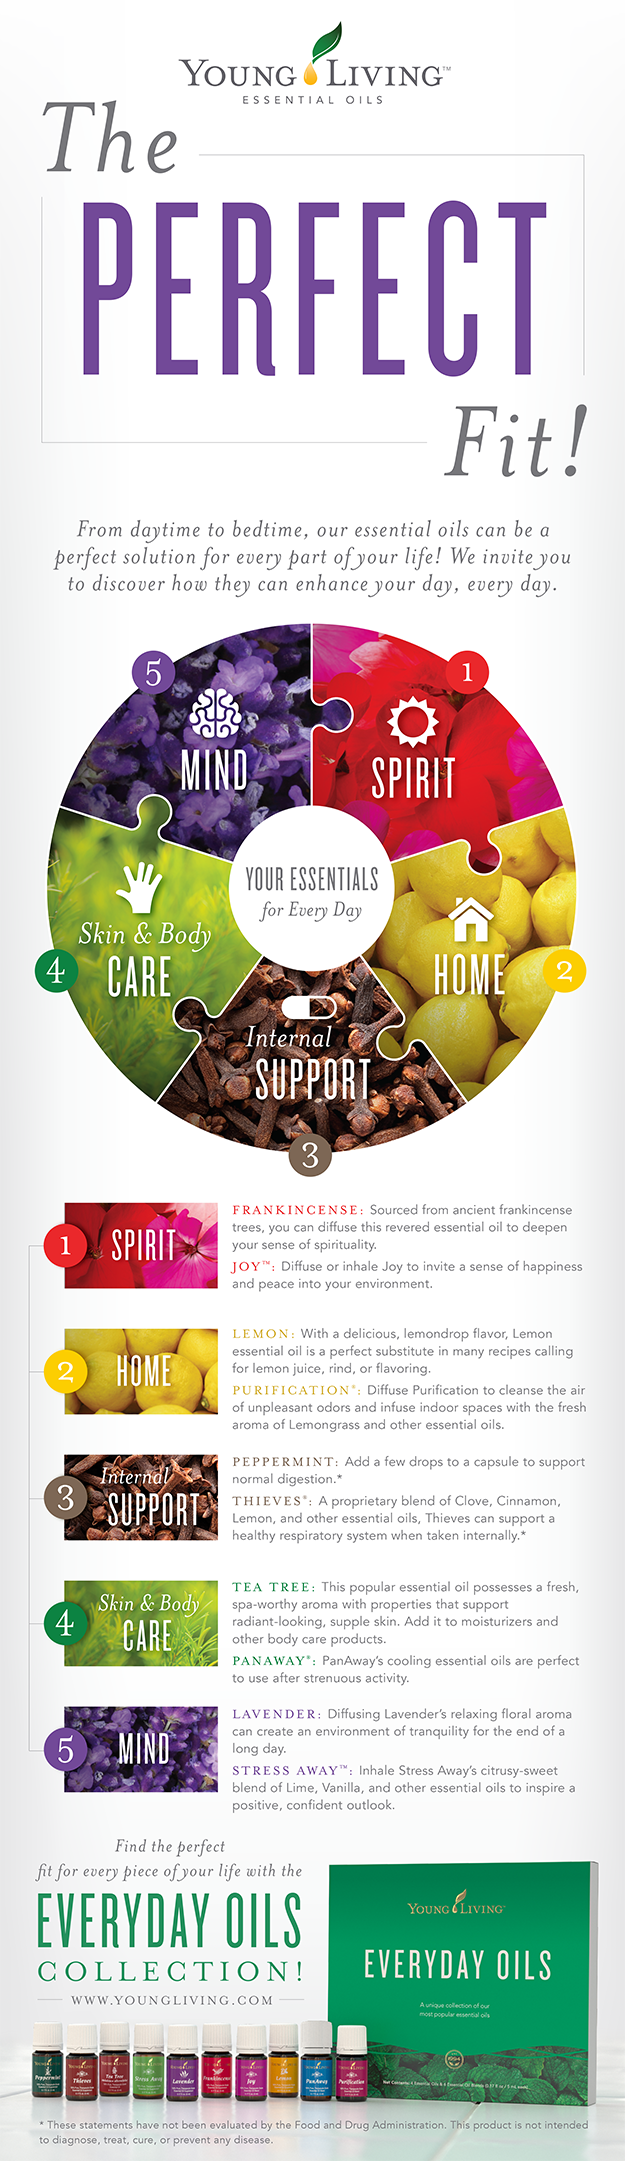 Everyday Oils from Young Living